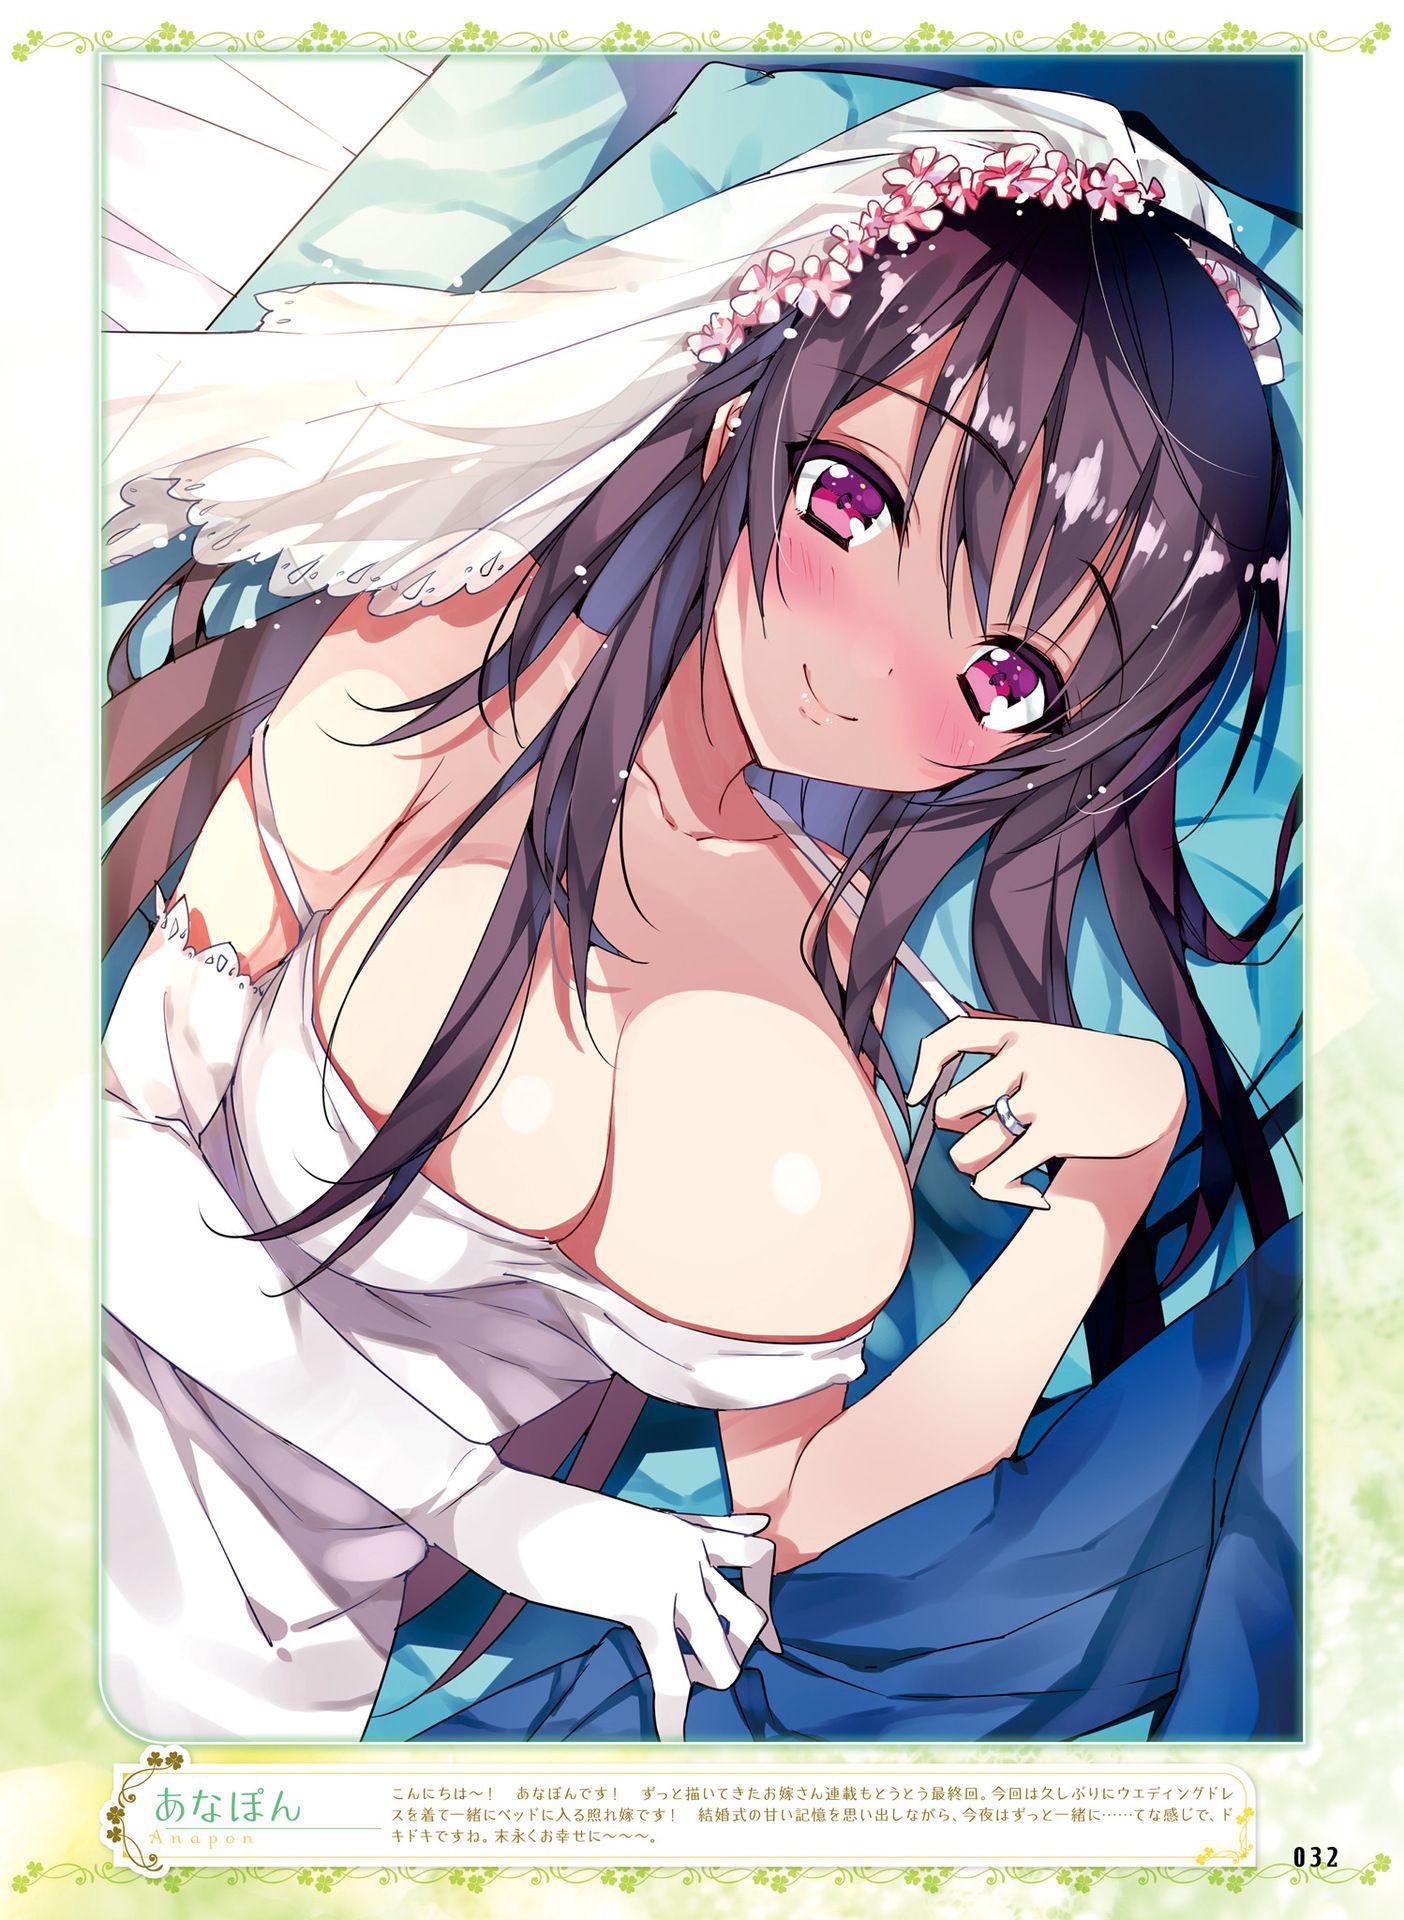 【Erotic Anime Summary】 Valley erotic images of busty beauties 【50 photos】 22